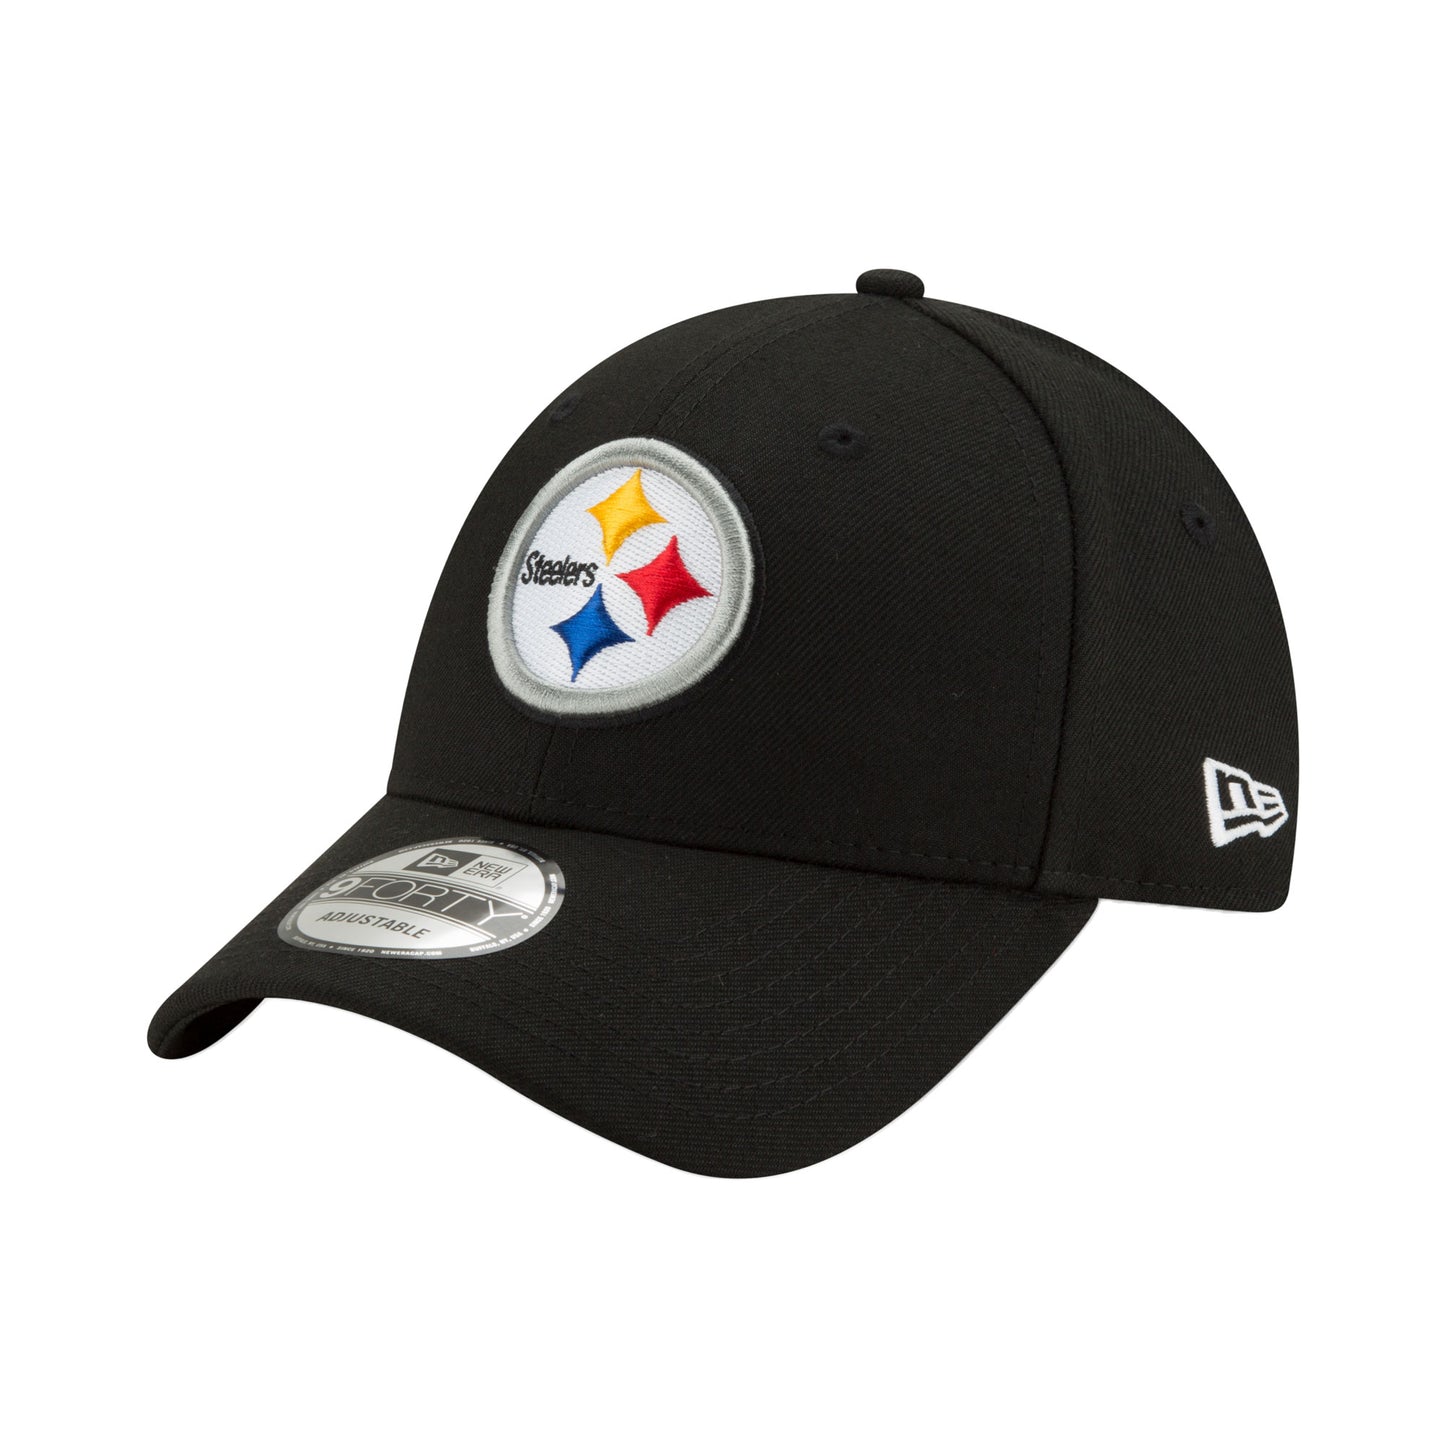 THE LEAGUE Pittburgh Steelers 9FORTY New Era Cap